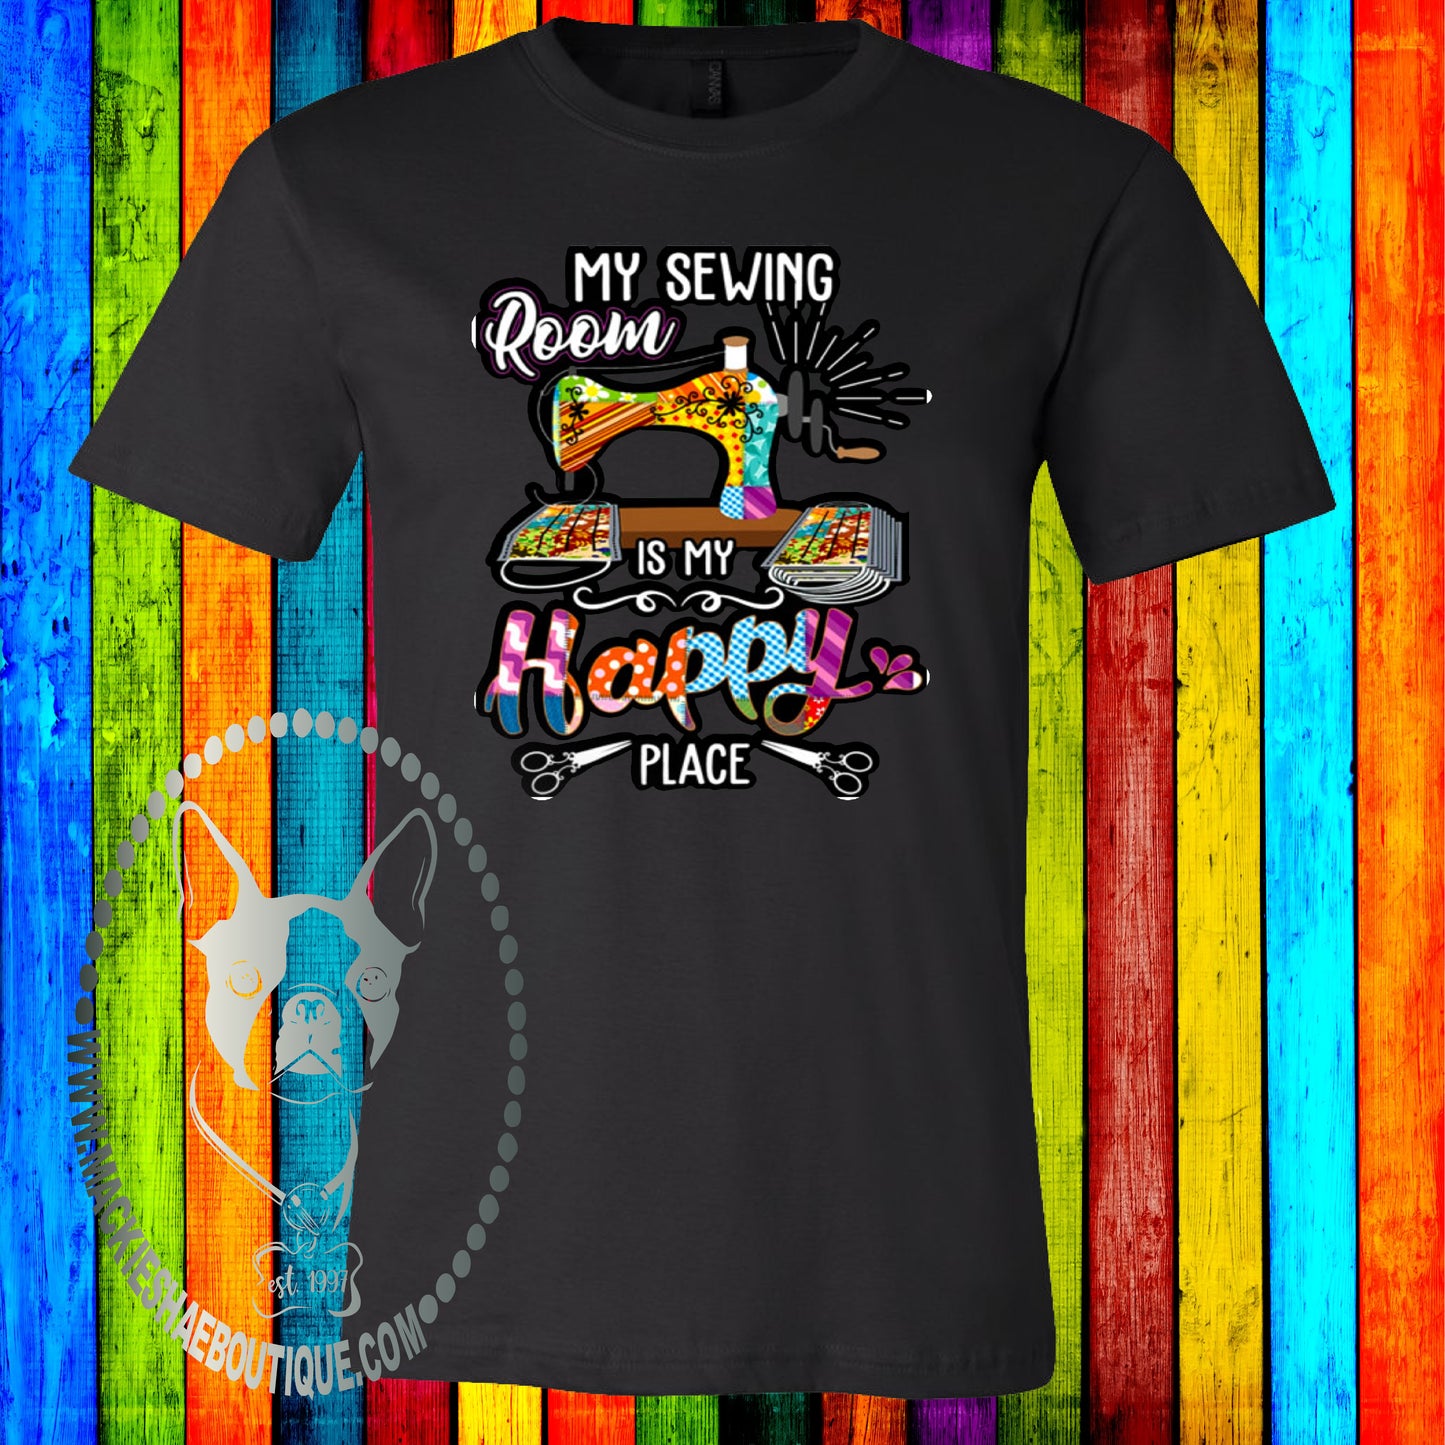 My Sewing Room is My Happy Place Custom Shirt, Soft Short Sleeve